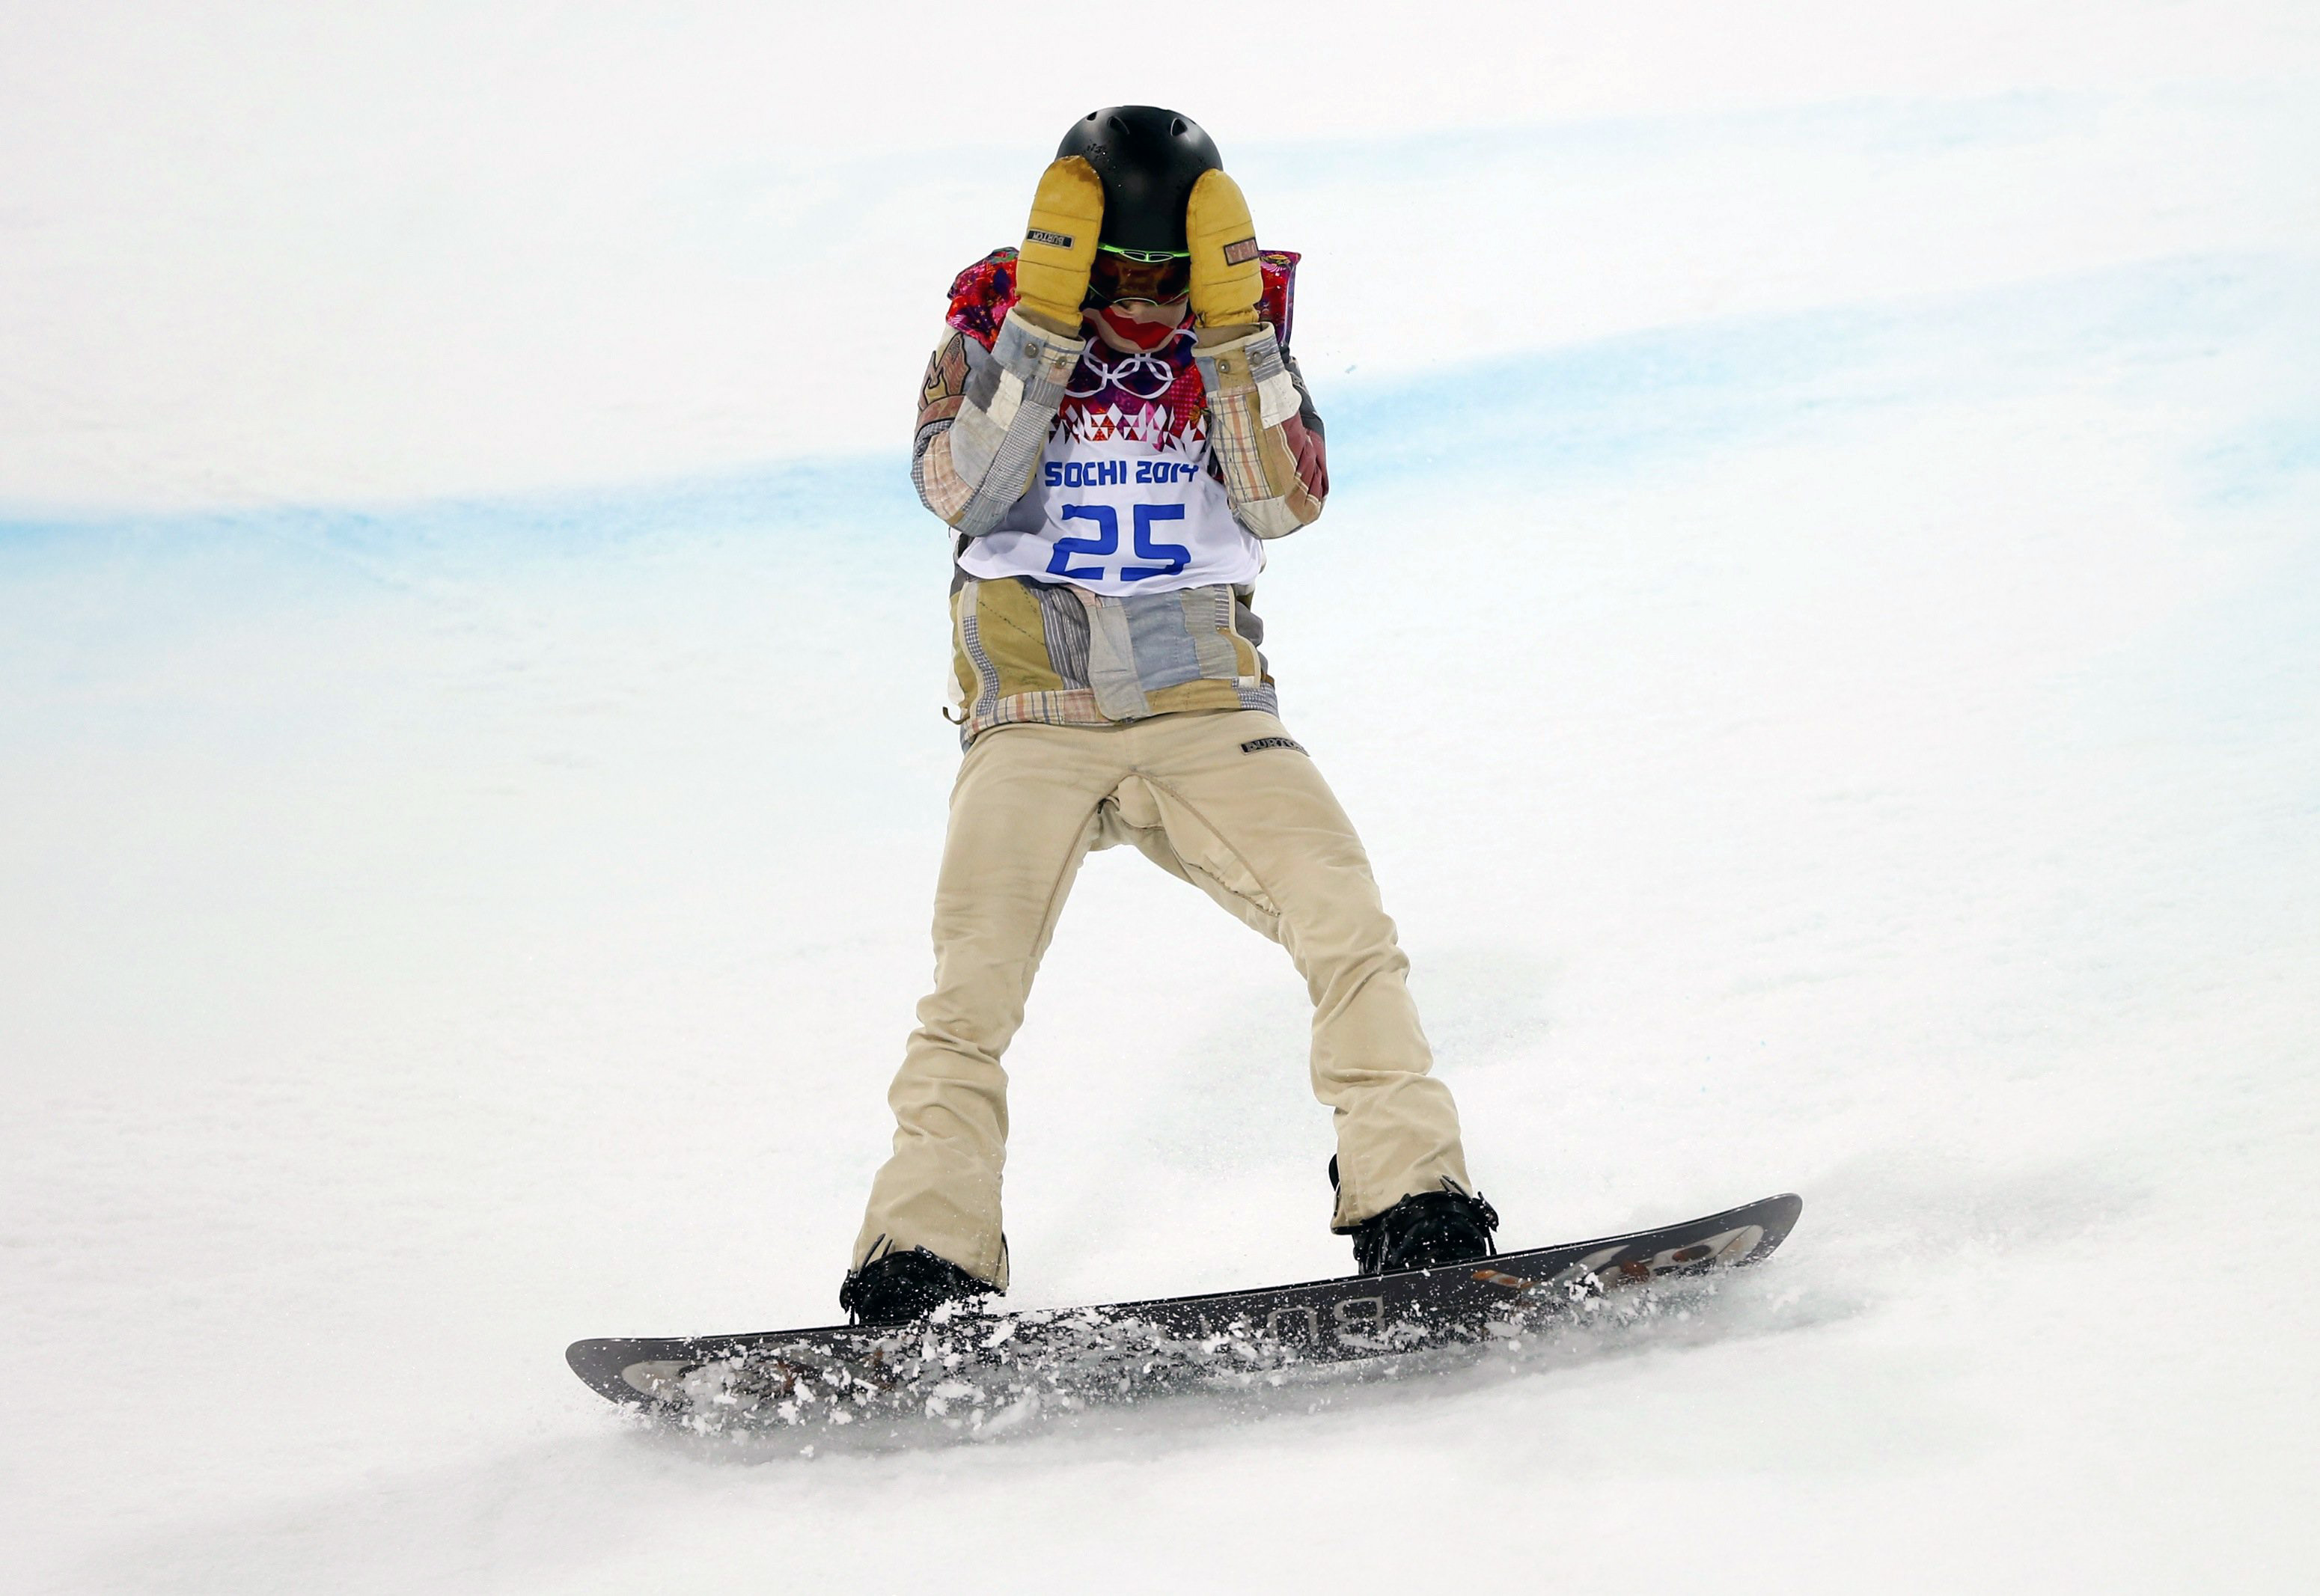 Shaun White of the U.S. reacts after crashing during the men's snowboard halfpipe final event at the 2014 Sochi Winter Olympic Games in Rosa Khutor